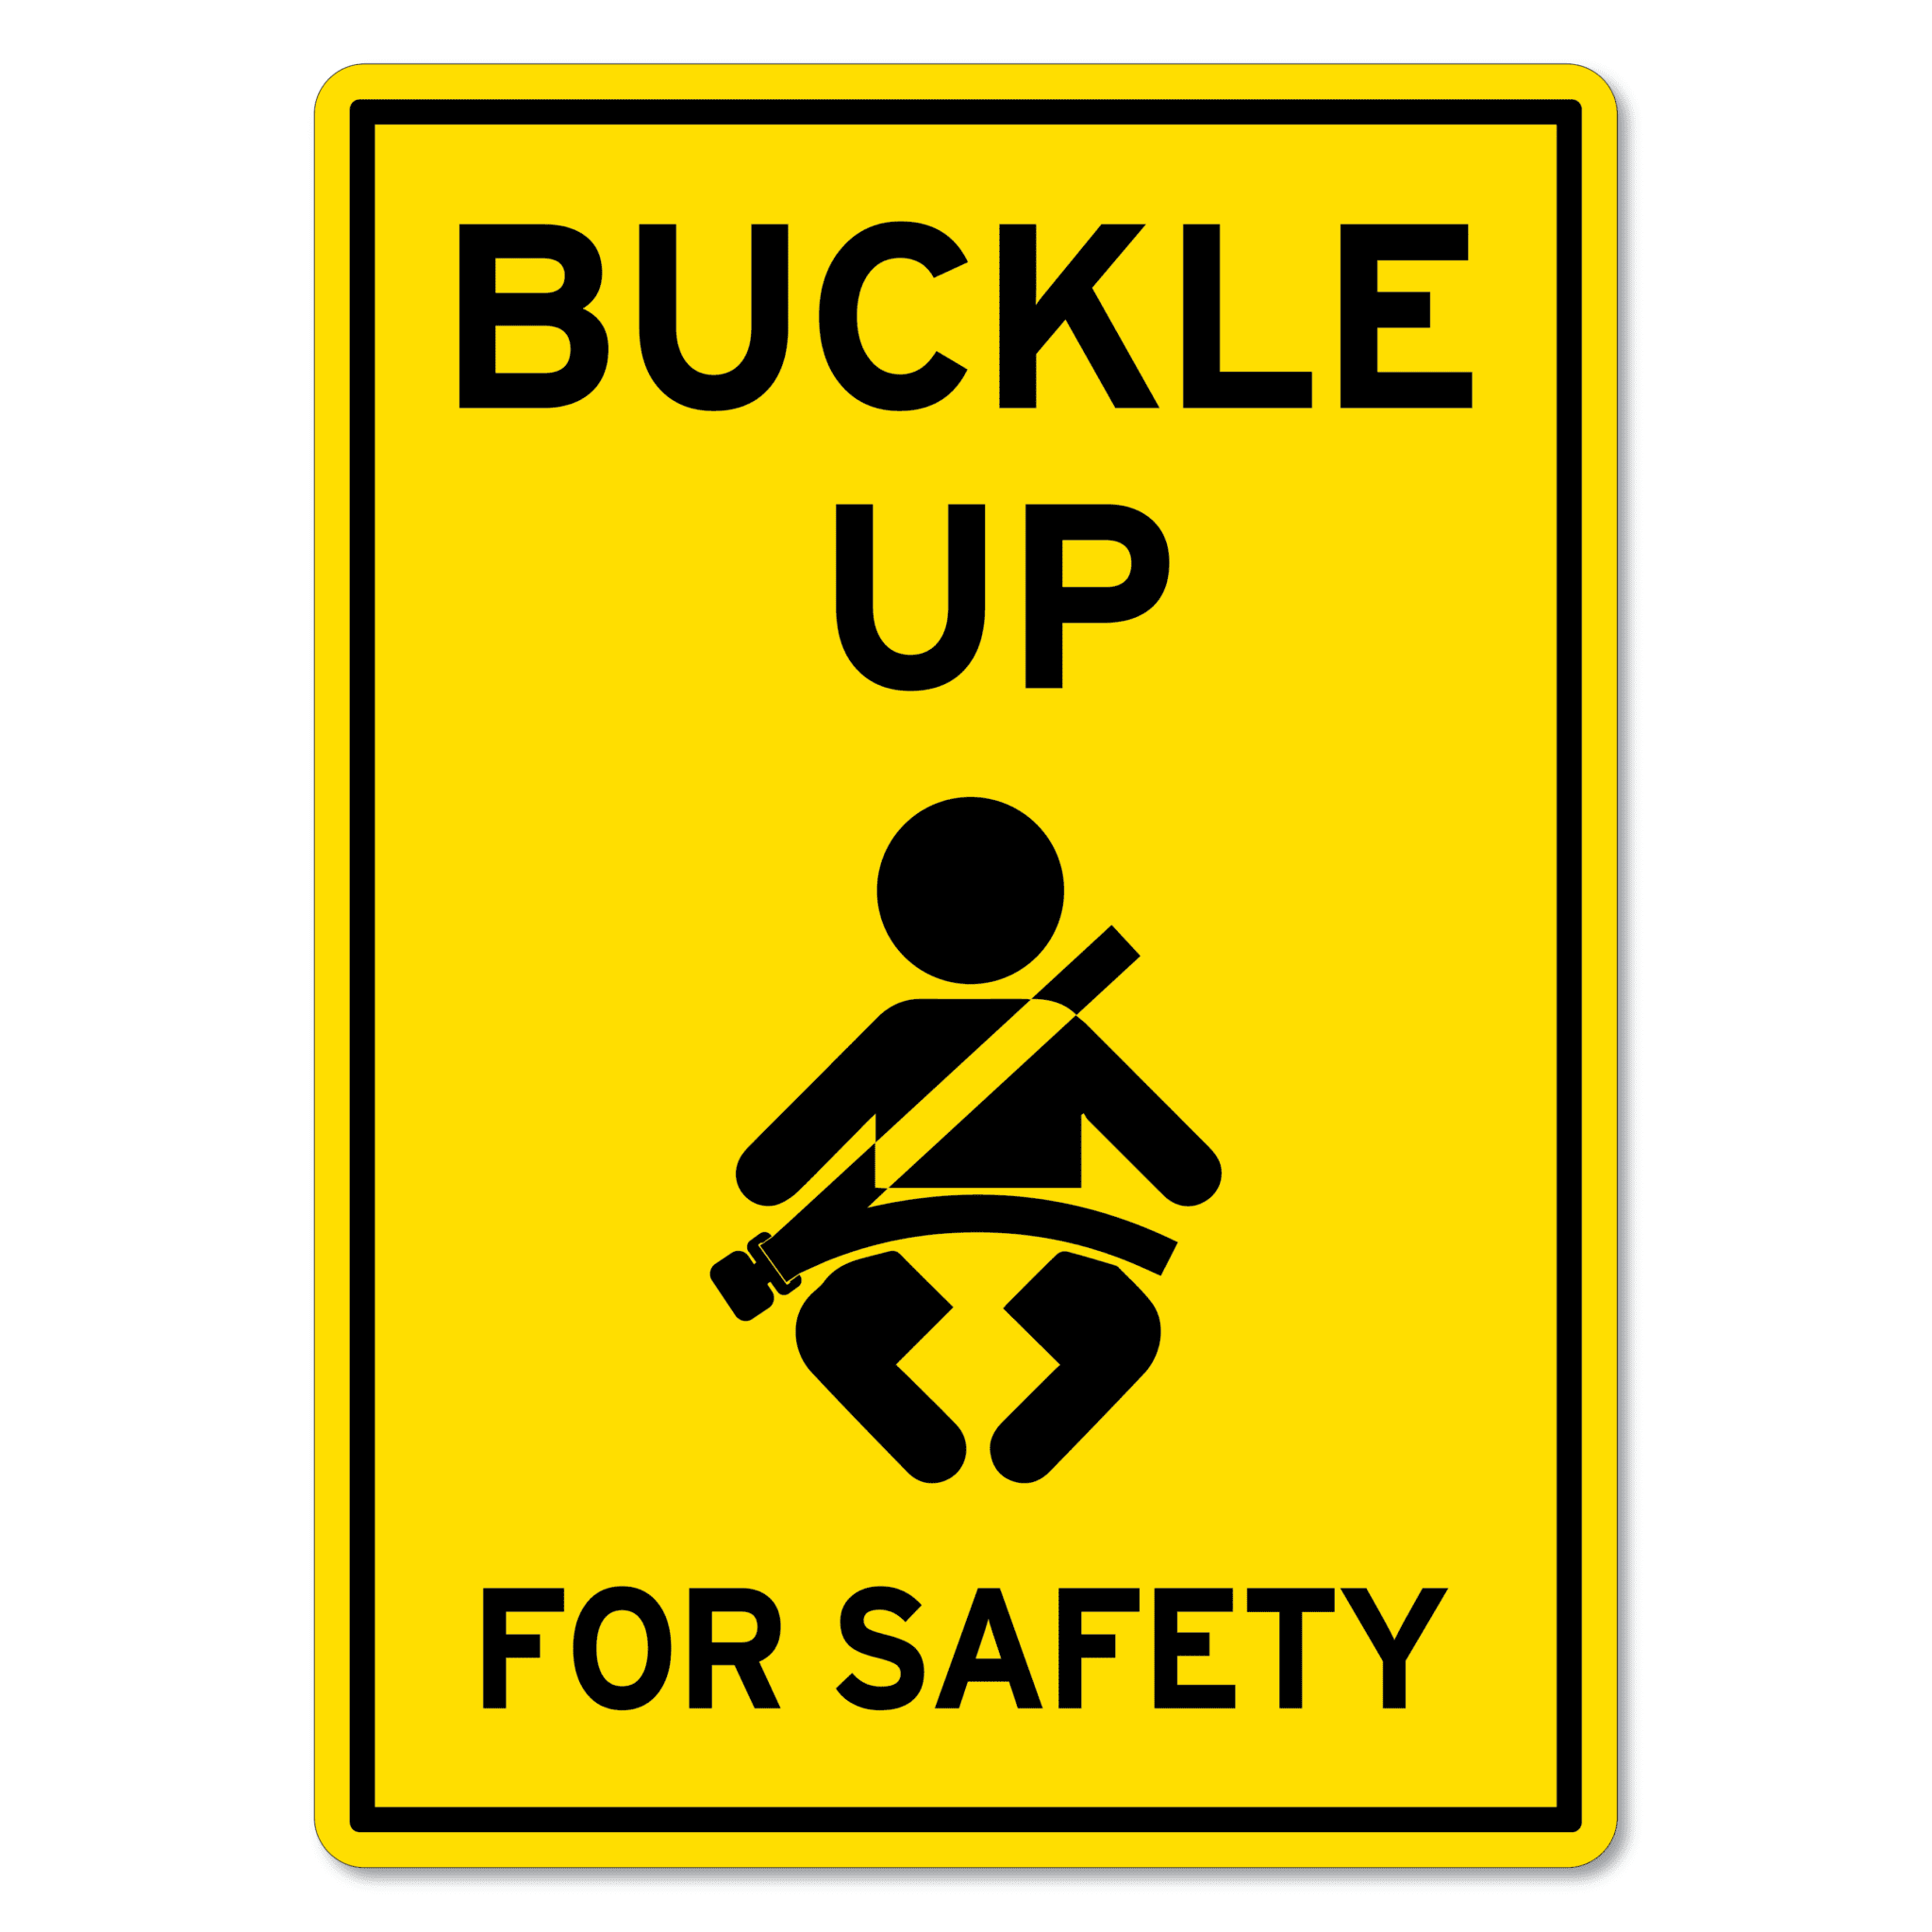 Buckle Up For Safety Seat Belt Sign - The Signmaker